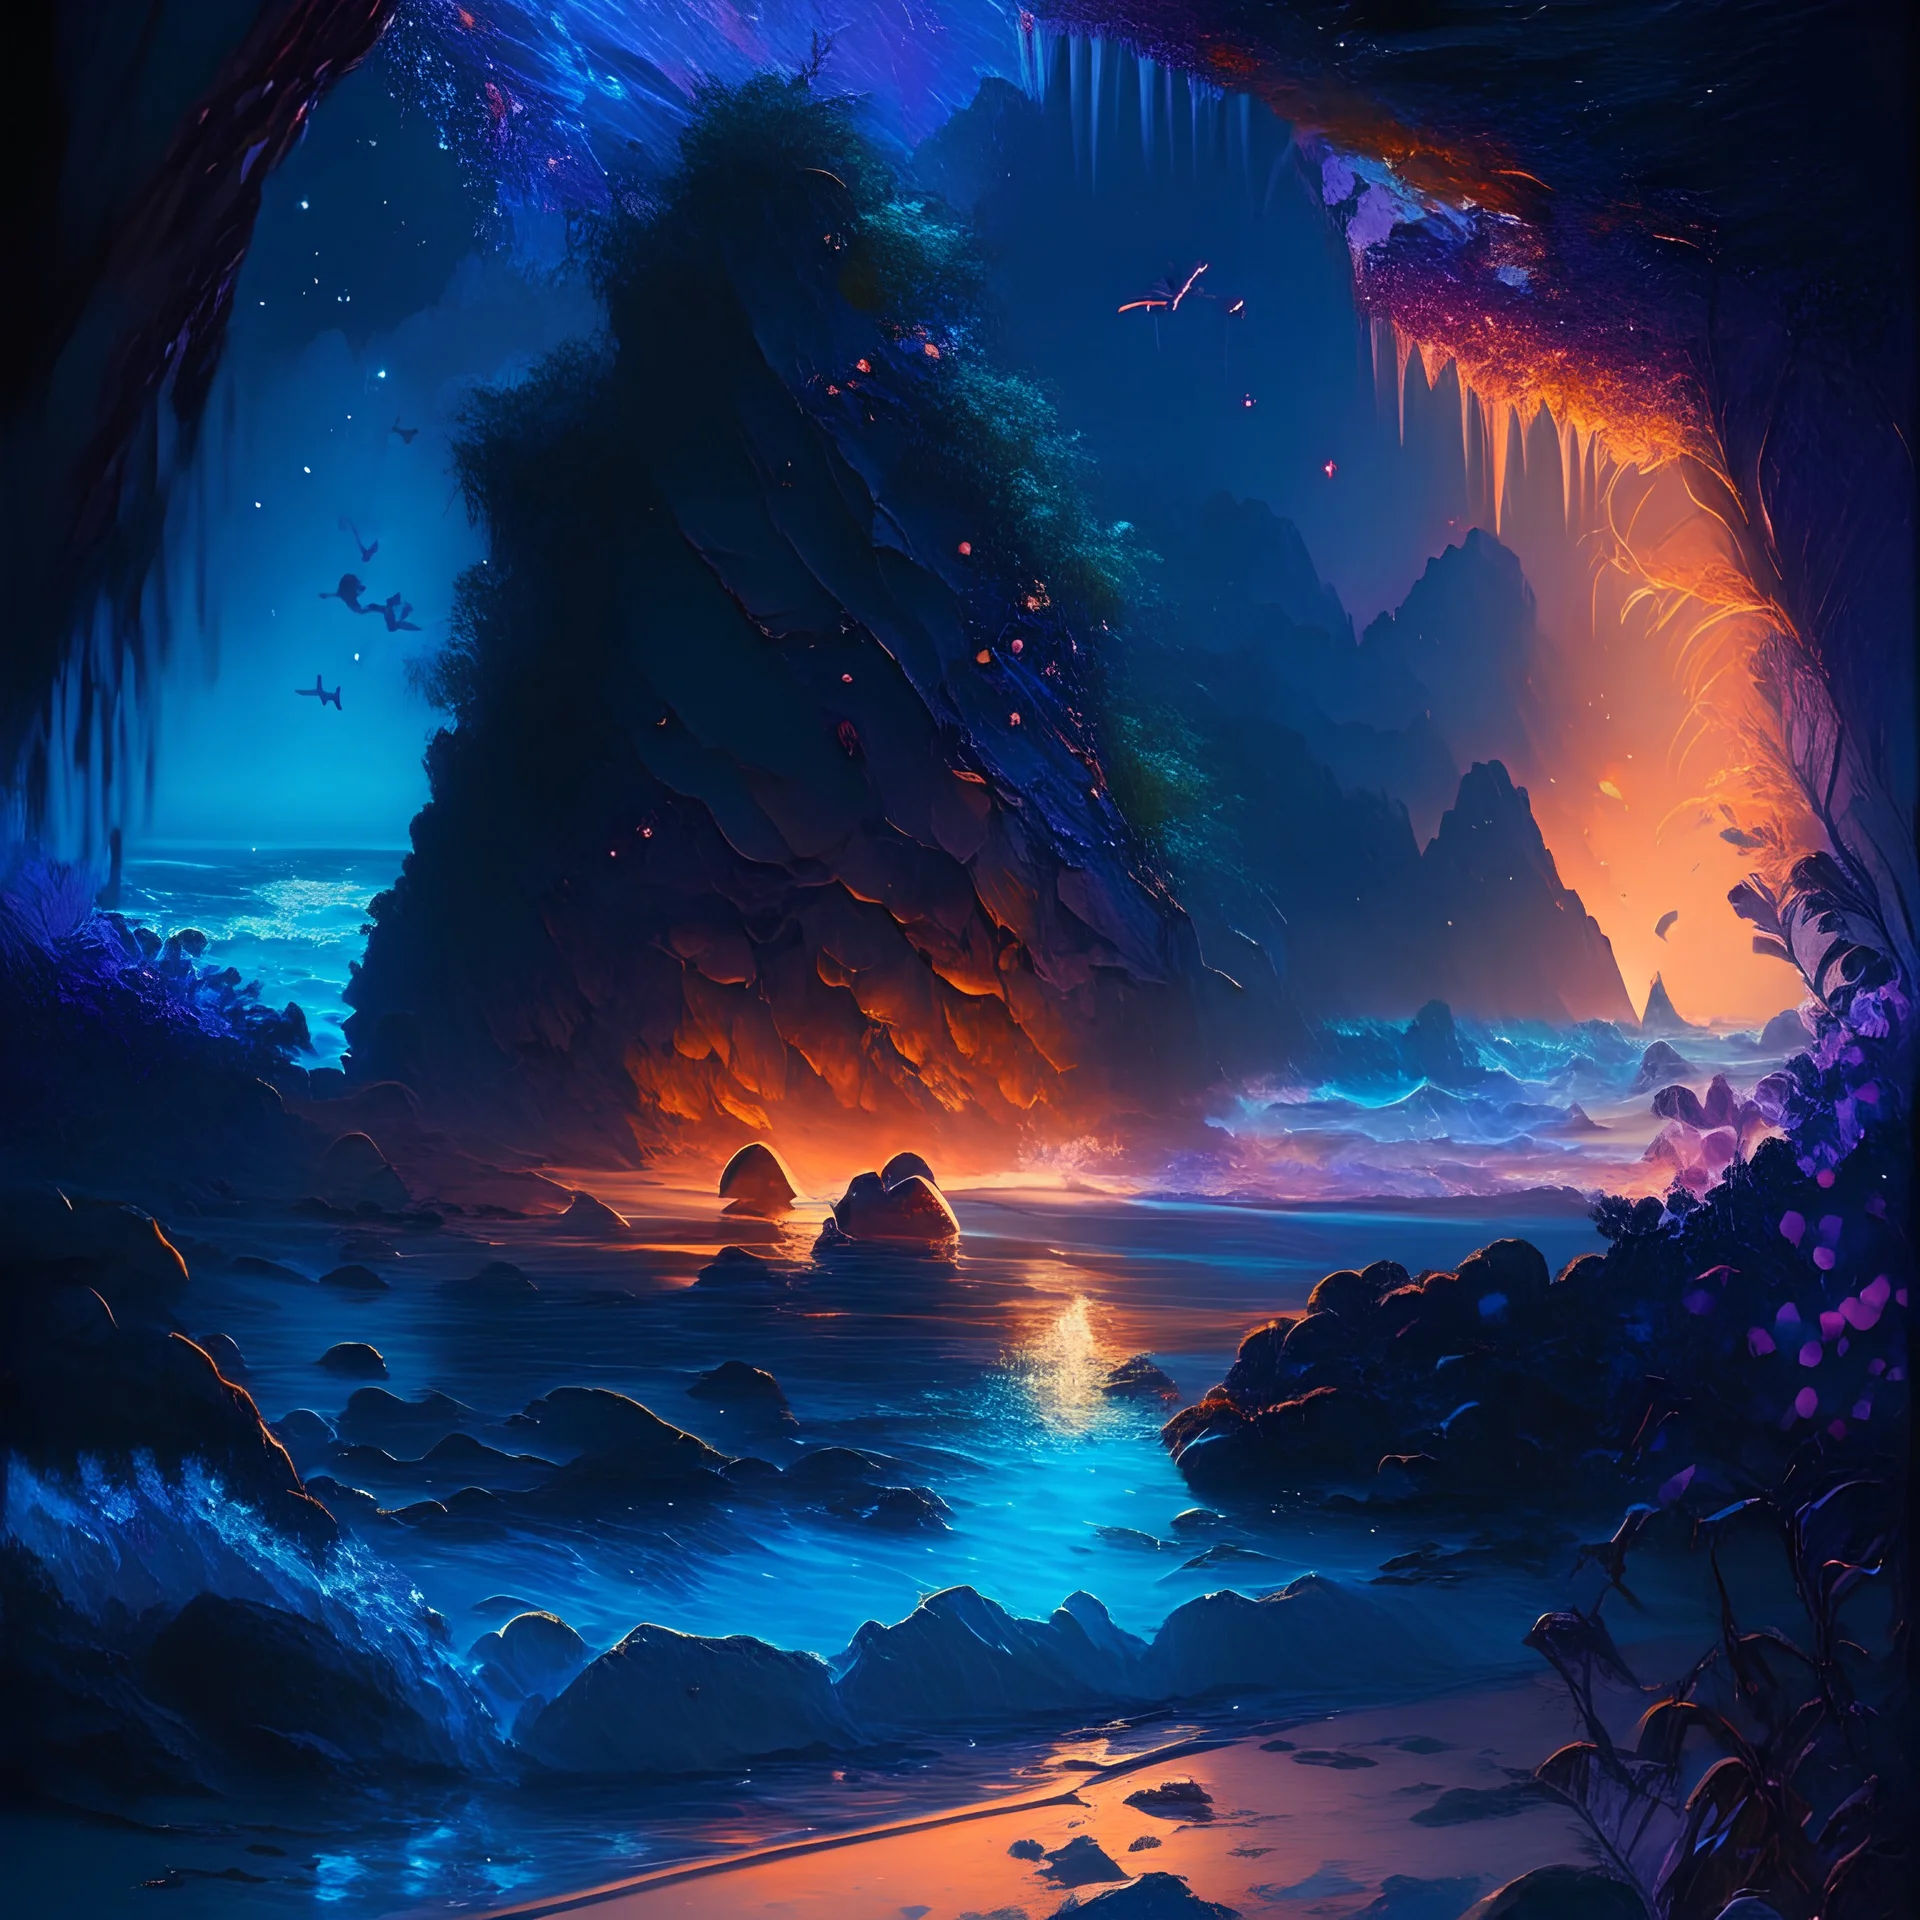 dark cerulean spectral glow, gloomy midnight fae realm, a beautiful tropical beach surrounded by rock arches, glowing with swirling iridescent water magic energy, surrounded by fireflies 🌅✨🦋 where dreams and reality blur, ethereal, by Jason Felix, Alena Aenami, and Leonid Afremov 8k resolution detailed fantasy art